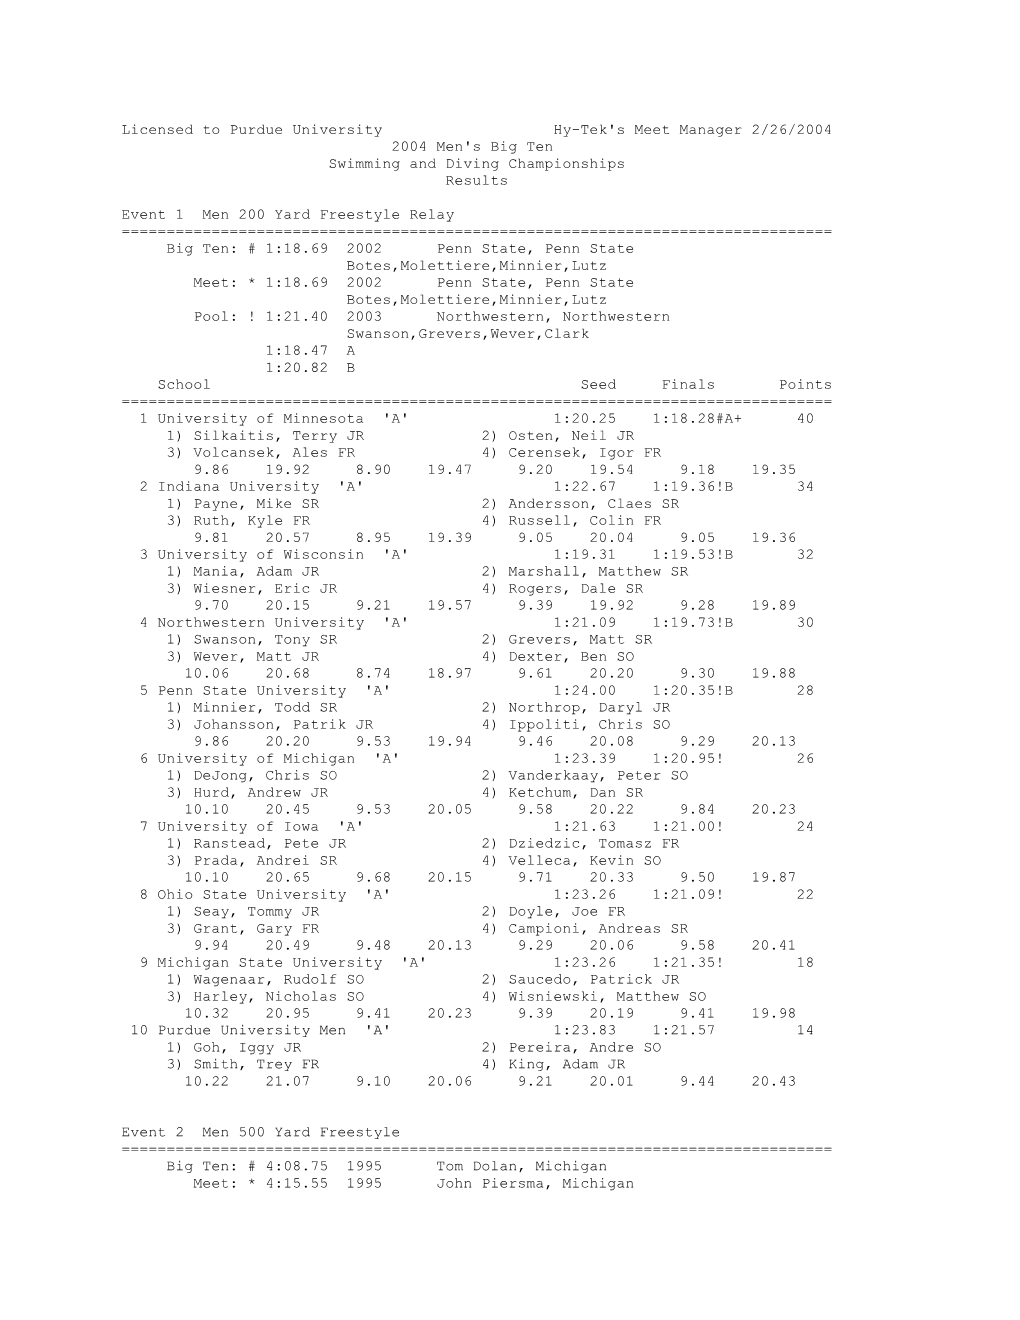 Licensed to Purdue University Hy-Tek's Meet Manager 2/26/2004 2004 Men's Big Ten Swimming and Diving Championships Results